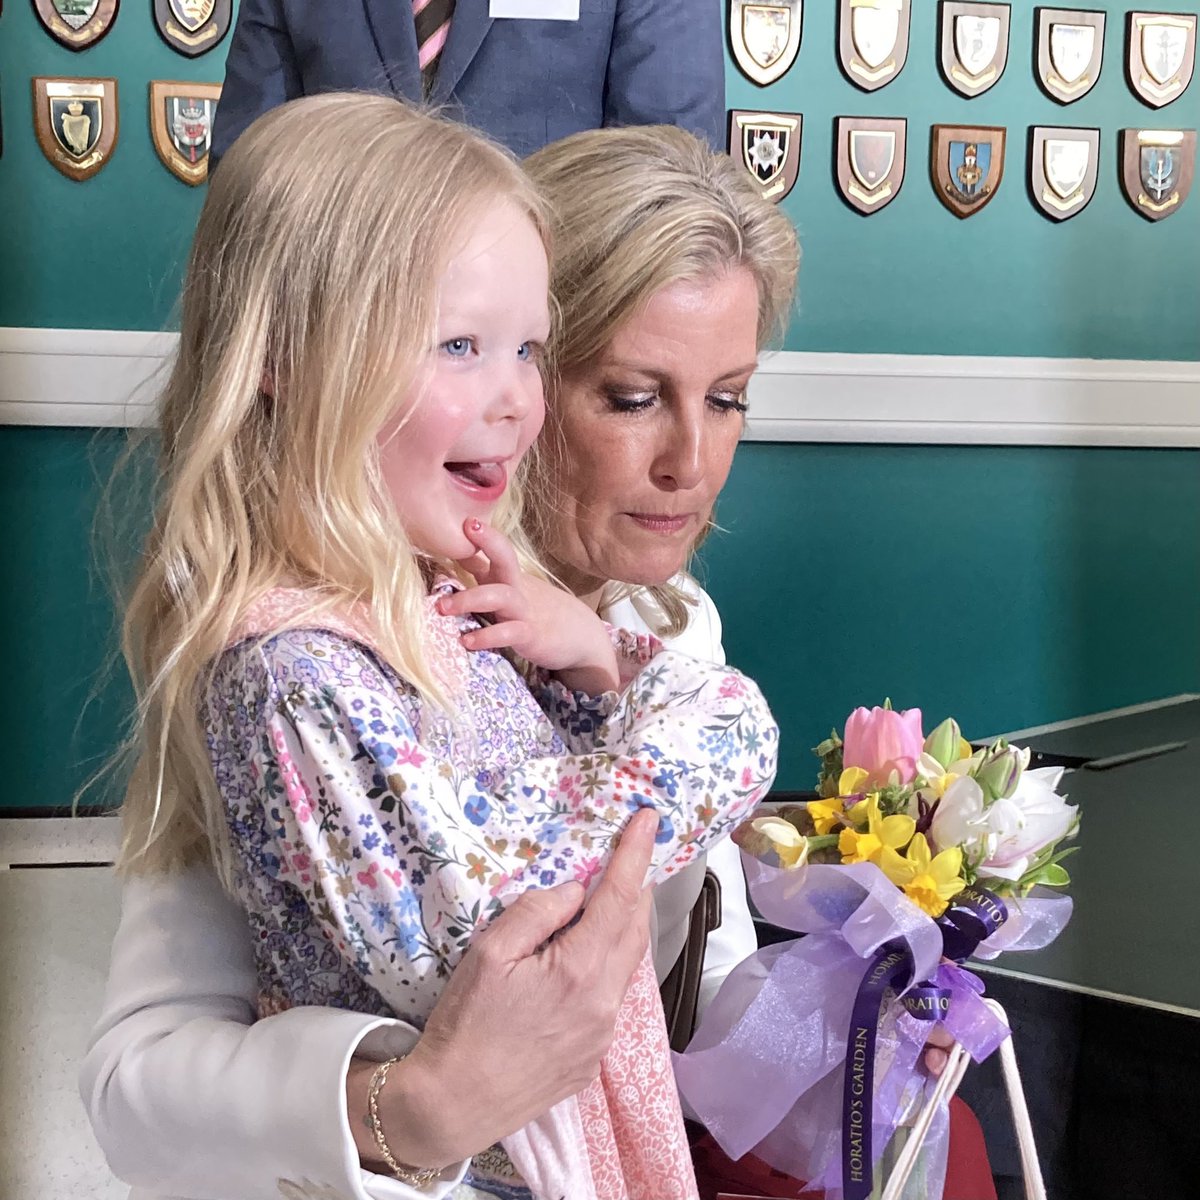 Sophie The Duchess of Edinburgh officially opening The Headley Court Veterans Orthopaedic Centre near Oswestry the Duchess looked very elegant and was warmly welcomed and did the Royal Family proud #SophieWessex #DuchessofEdinburgh